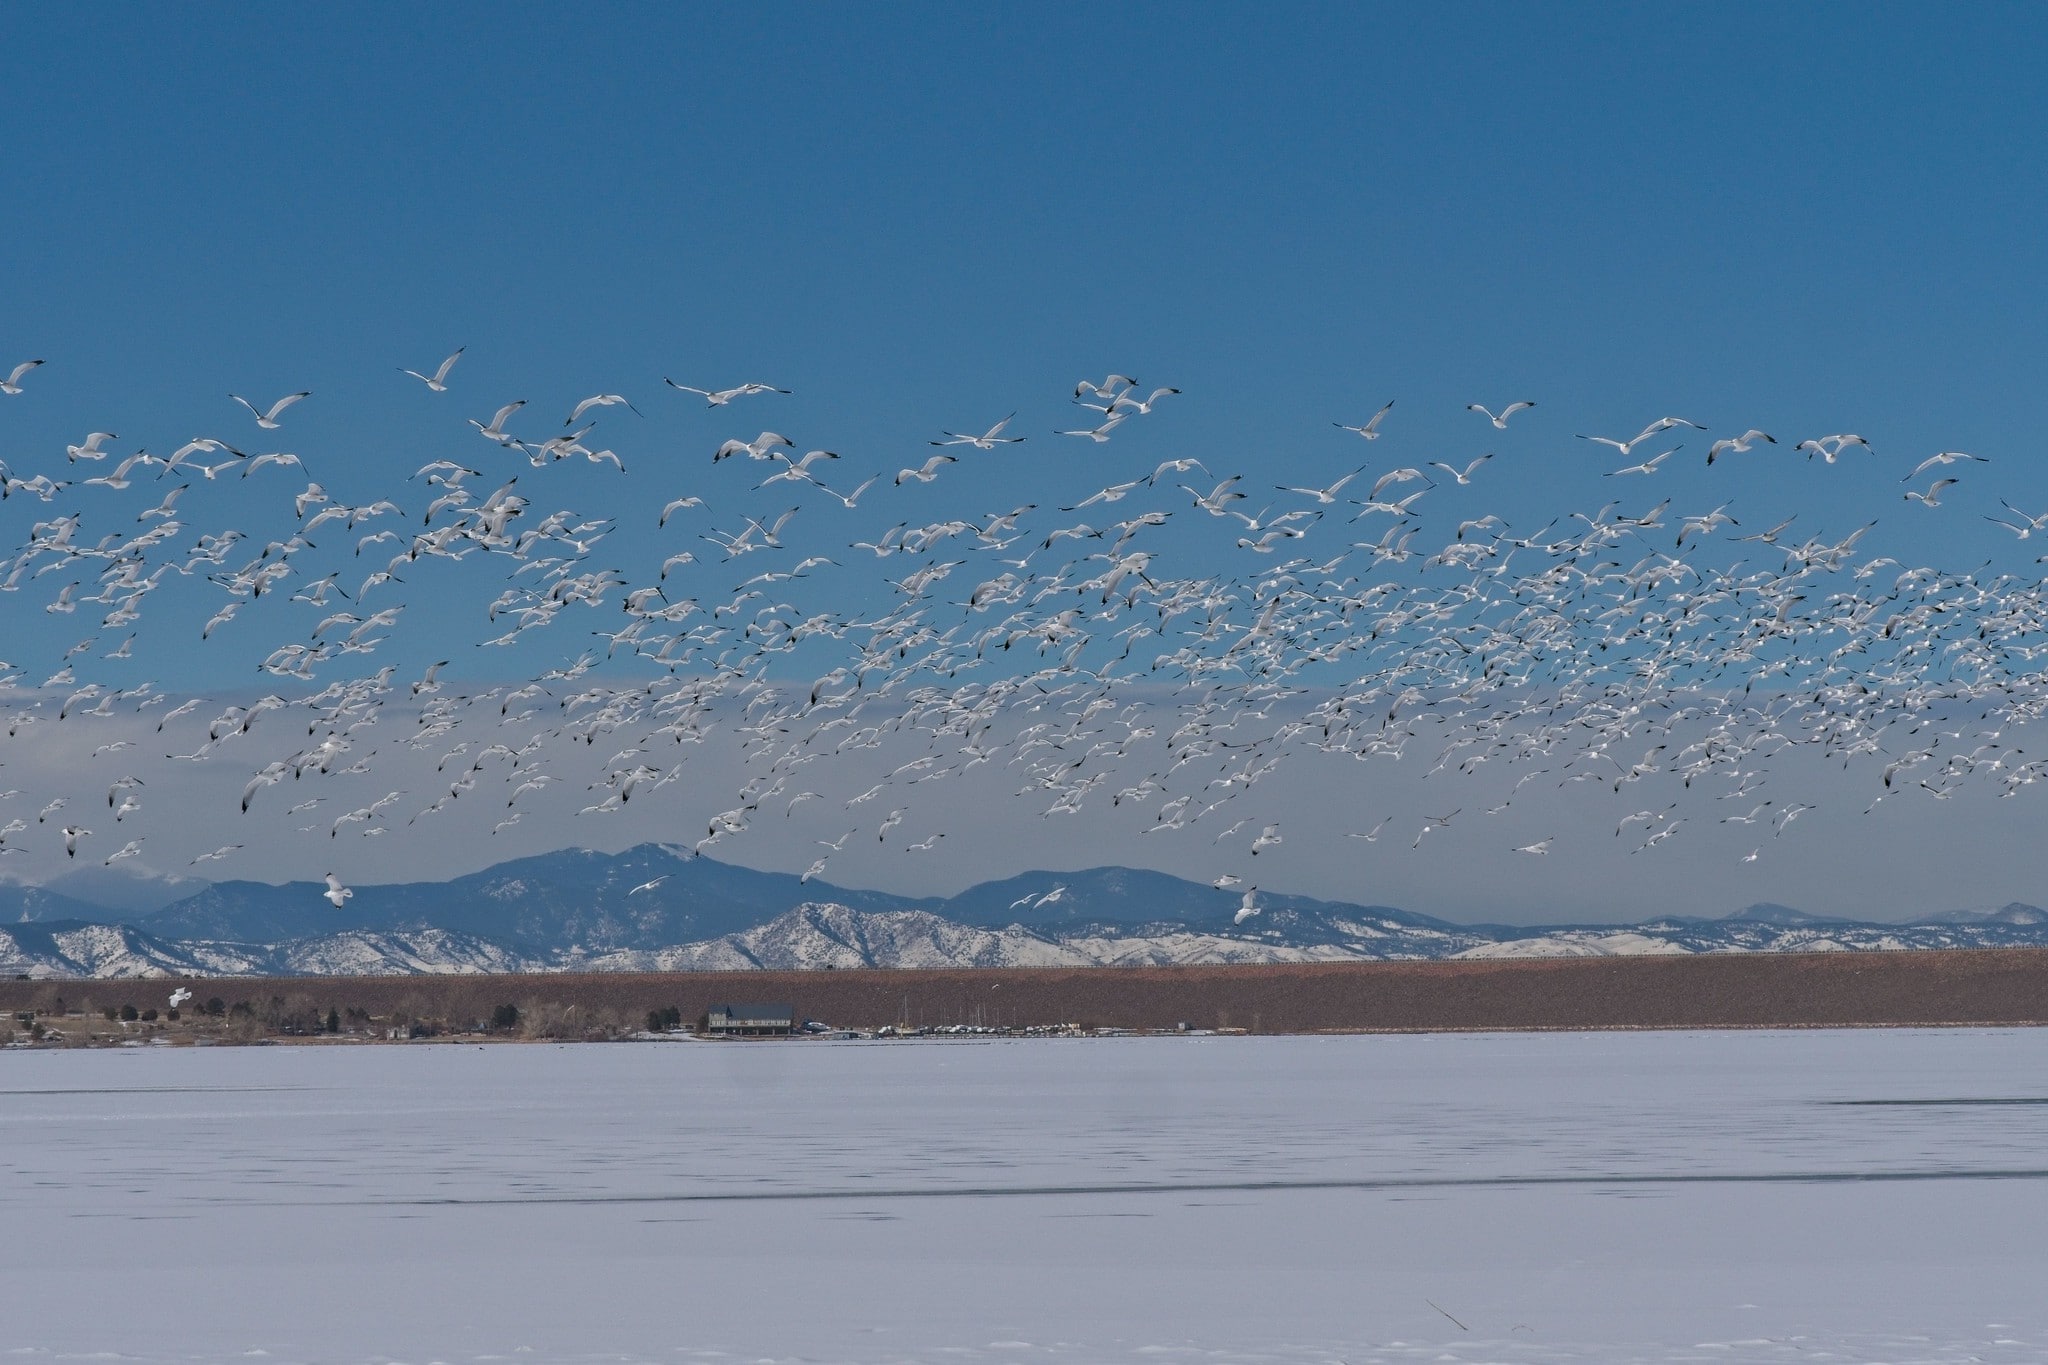 Frozen lake with flock of birds flying over